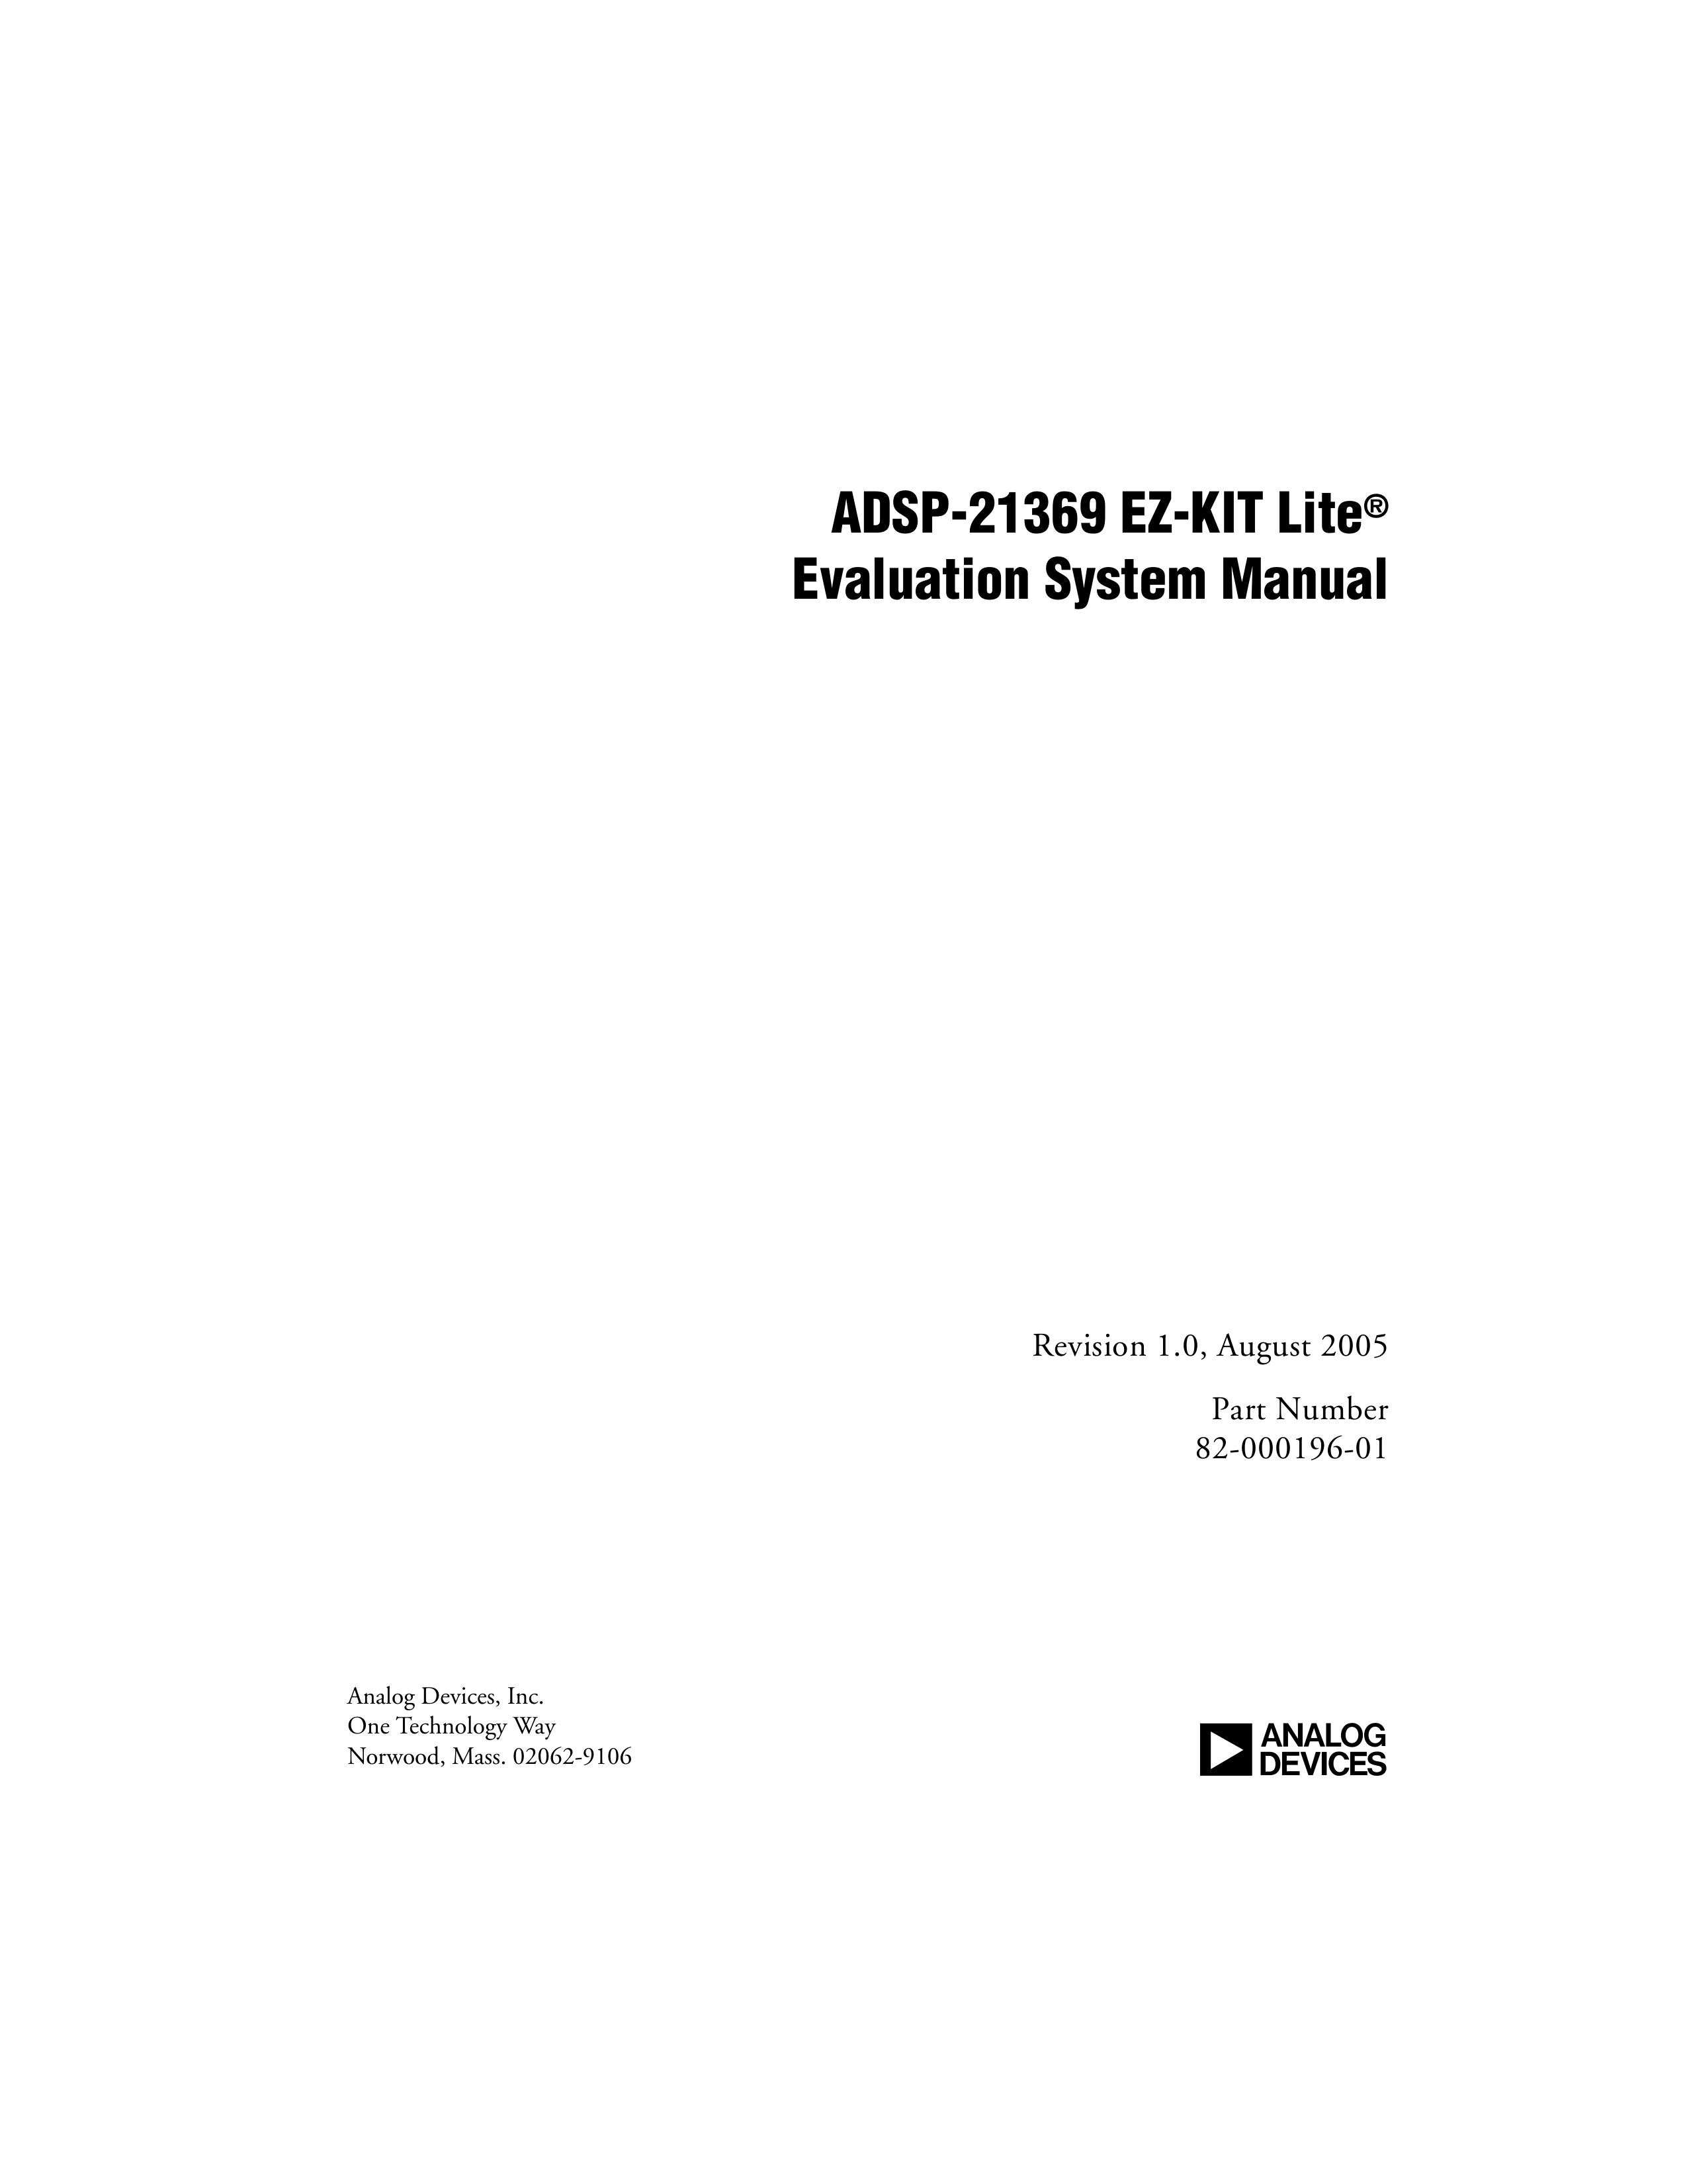 Analog Devices ADSP-21369 Personal Lift User Manual